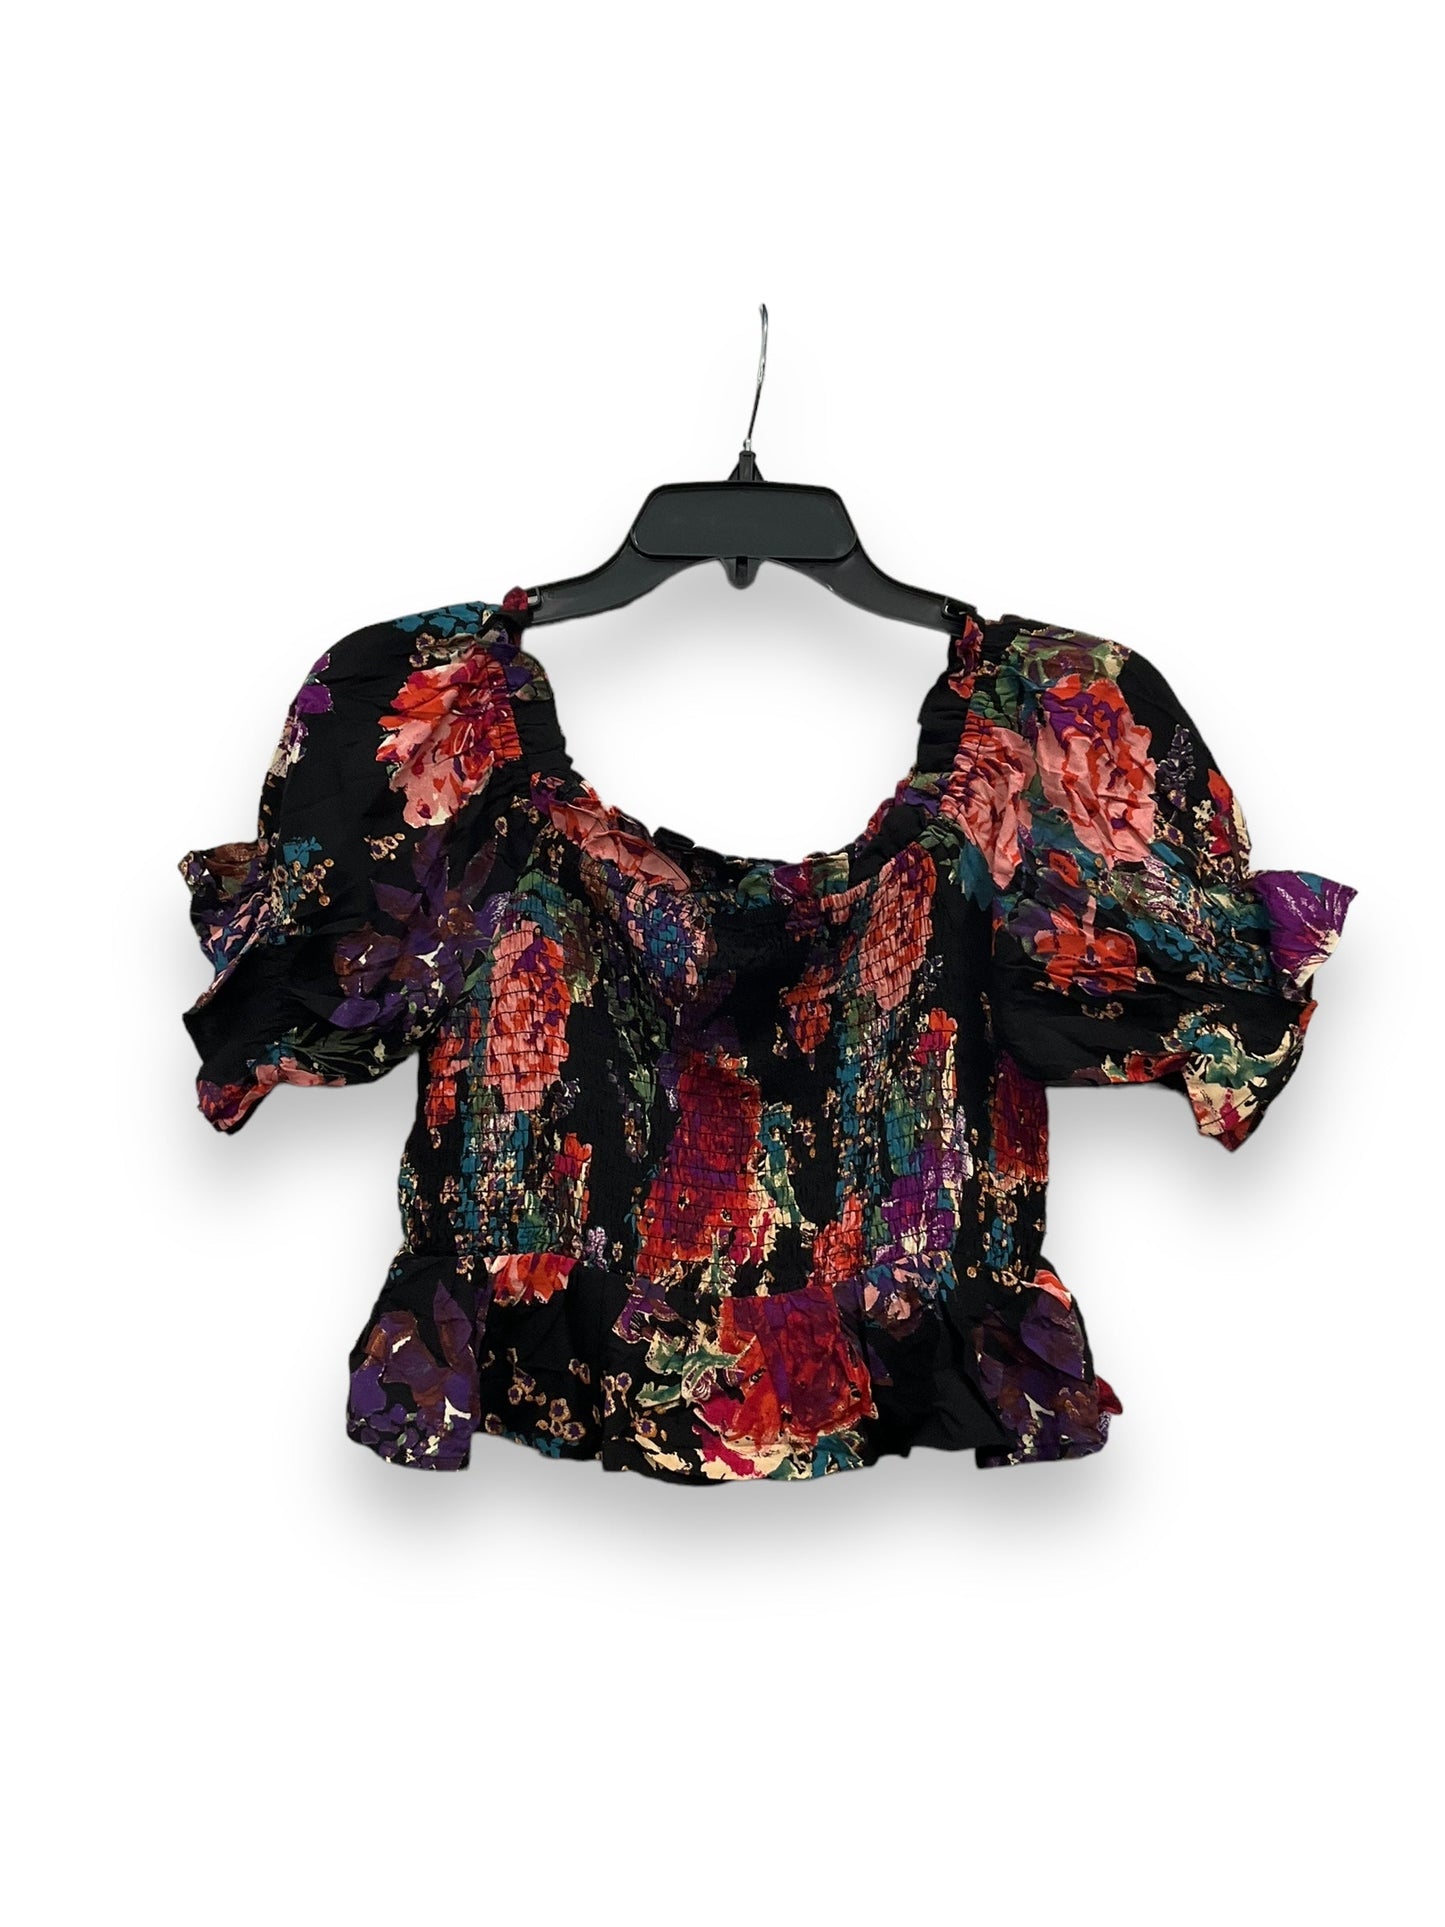 Floral Print Top Short Sleeve Andree By Unit, Size S